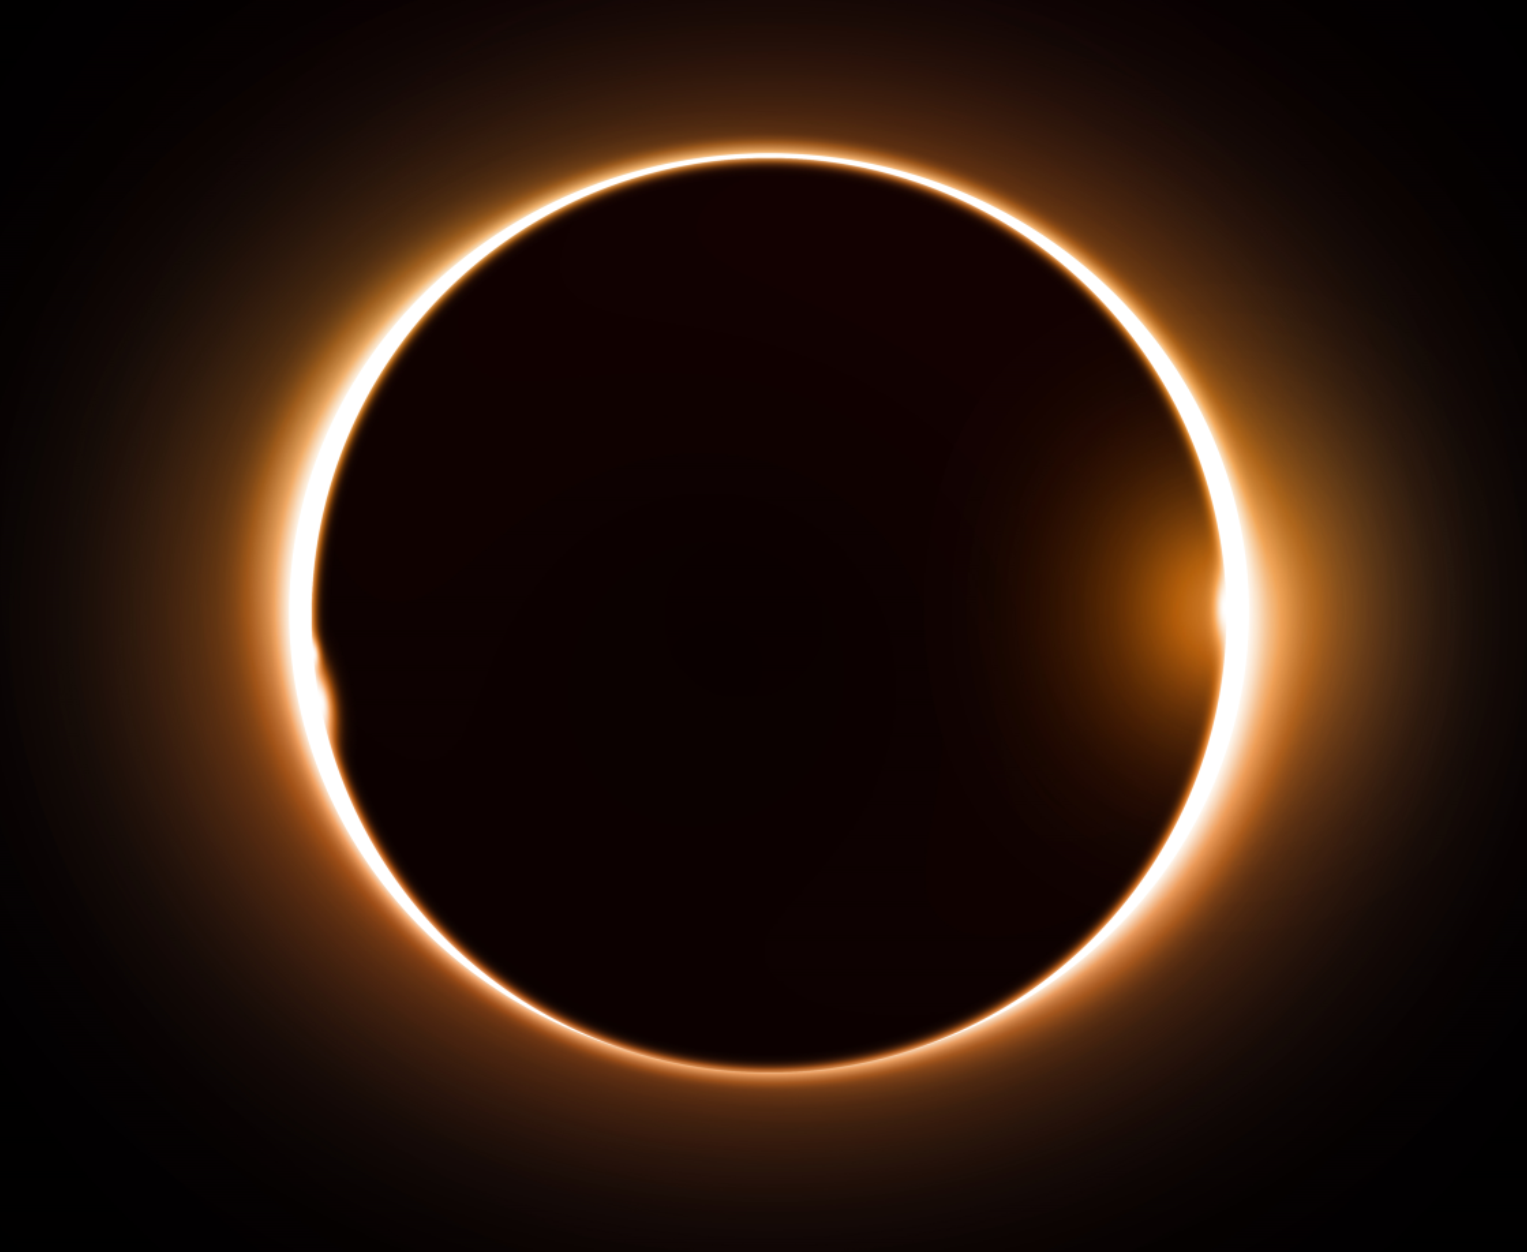 Are Total Solar Eclipses Rare? Well, The Last One Was In 2012 And The Next One Is In 2024 U2013 So You Tell Me. Are They As Rare As The Media Has Hdpng.com  - Lunar Eclipse, Transparent background PNG HD thumbnail